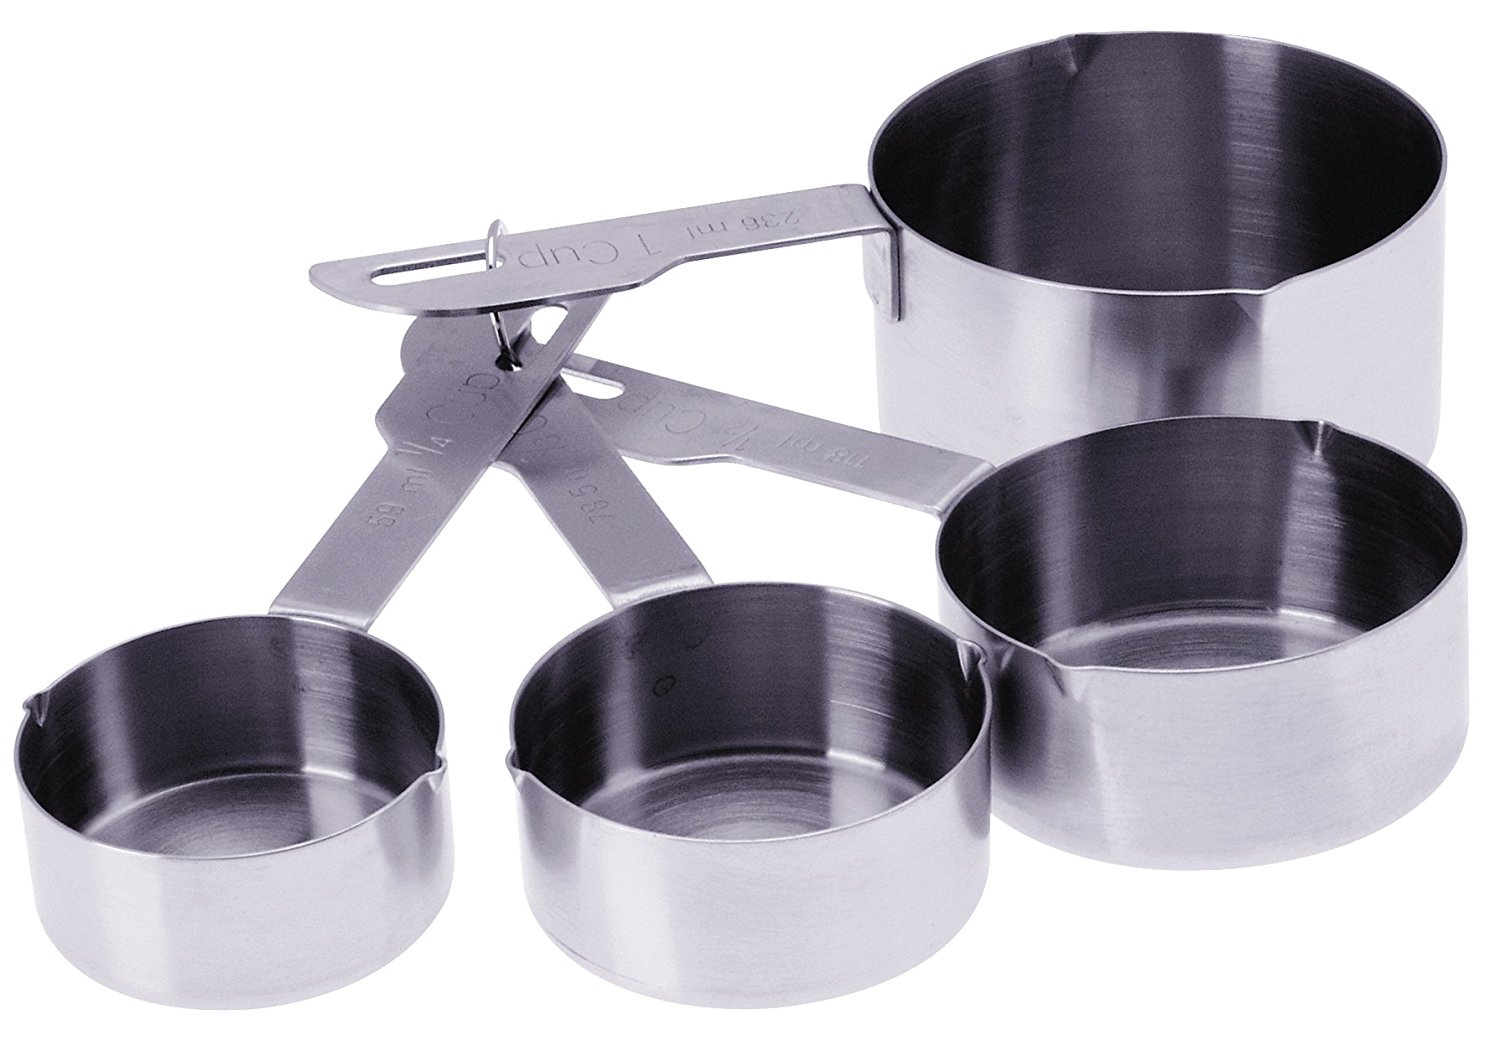 Amazon Pluspng.com: Progressive International Heavy Duty 4 Piece Stainless Steel Measuring Cup: Kitchen U0026 Dining - Measuring Cup, Transparent background PNG HD thumbnail